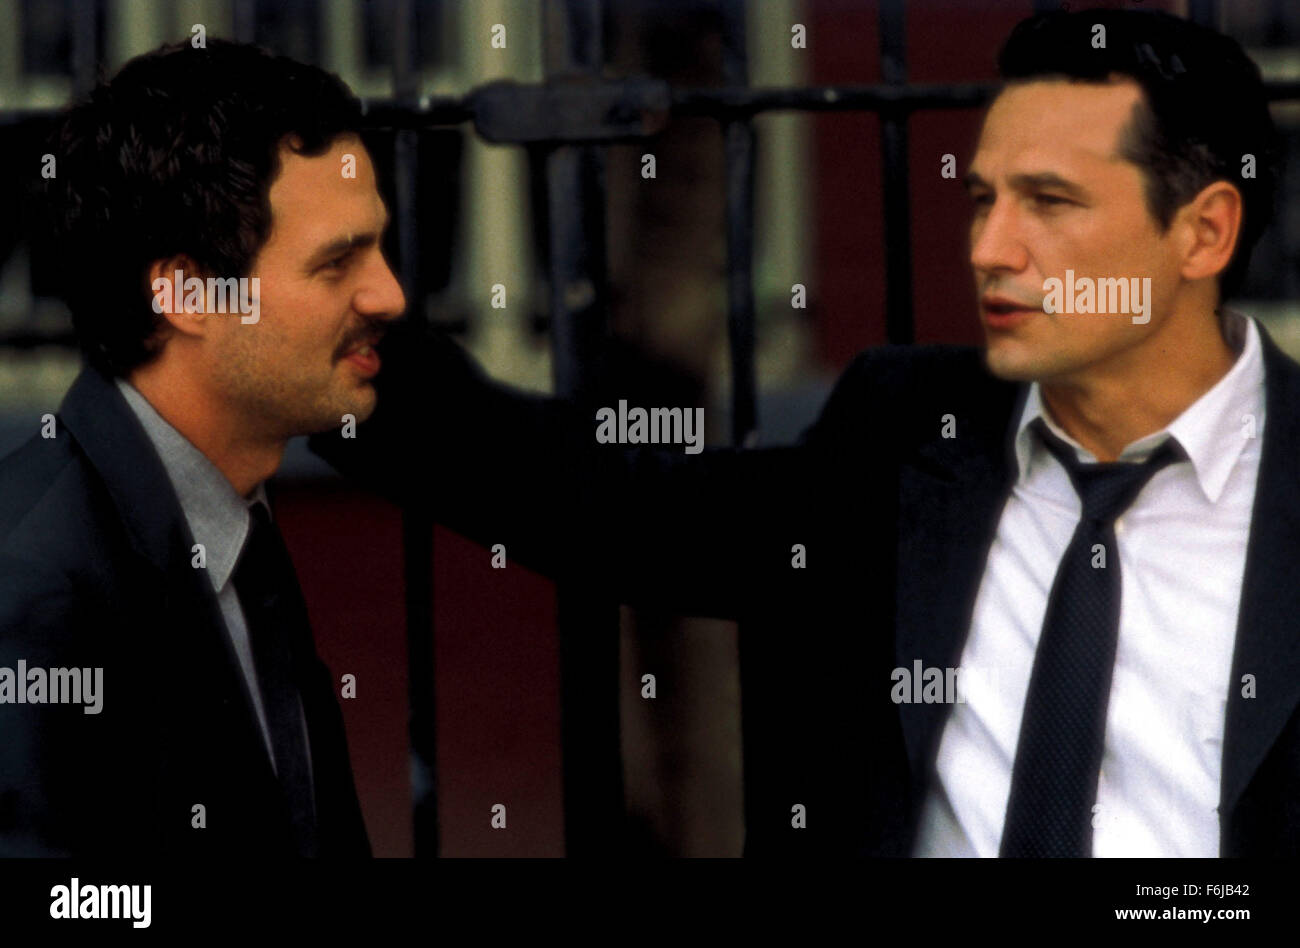 Jul 11, 2003; Hollywood, CA, USA; MARK RUFFALO and NICK DAMICI star as Detectives Giovanni Malloy and Richard Rodriguez in the thrilling crime mystery 'In the Cut' directed by Jane Campion. Stock Photo